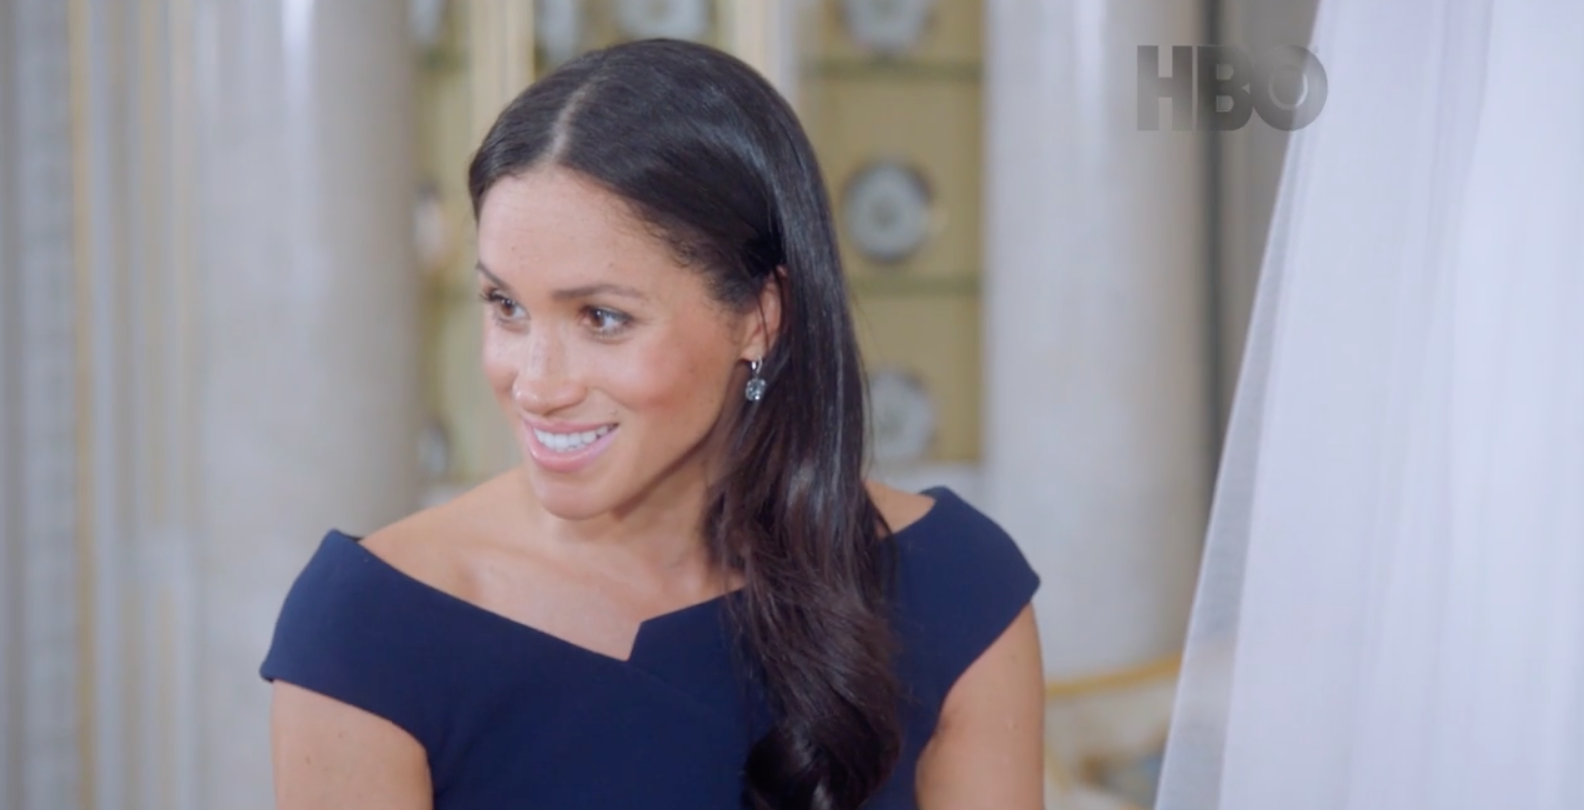 Meghan Markle shares details of her wedding gown (HBO)